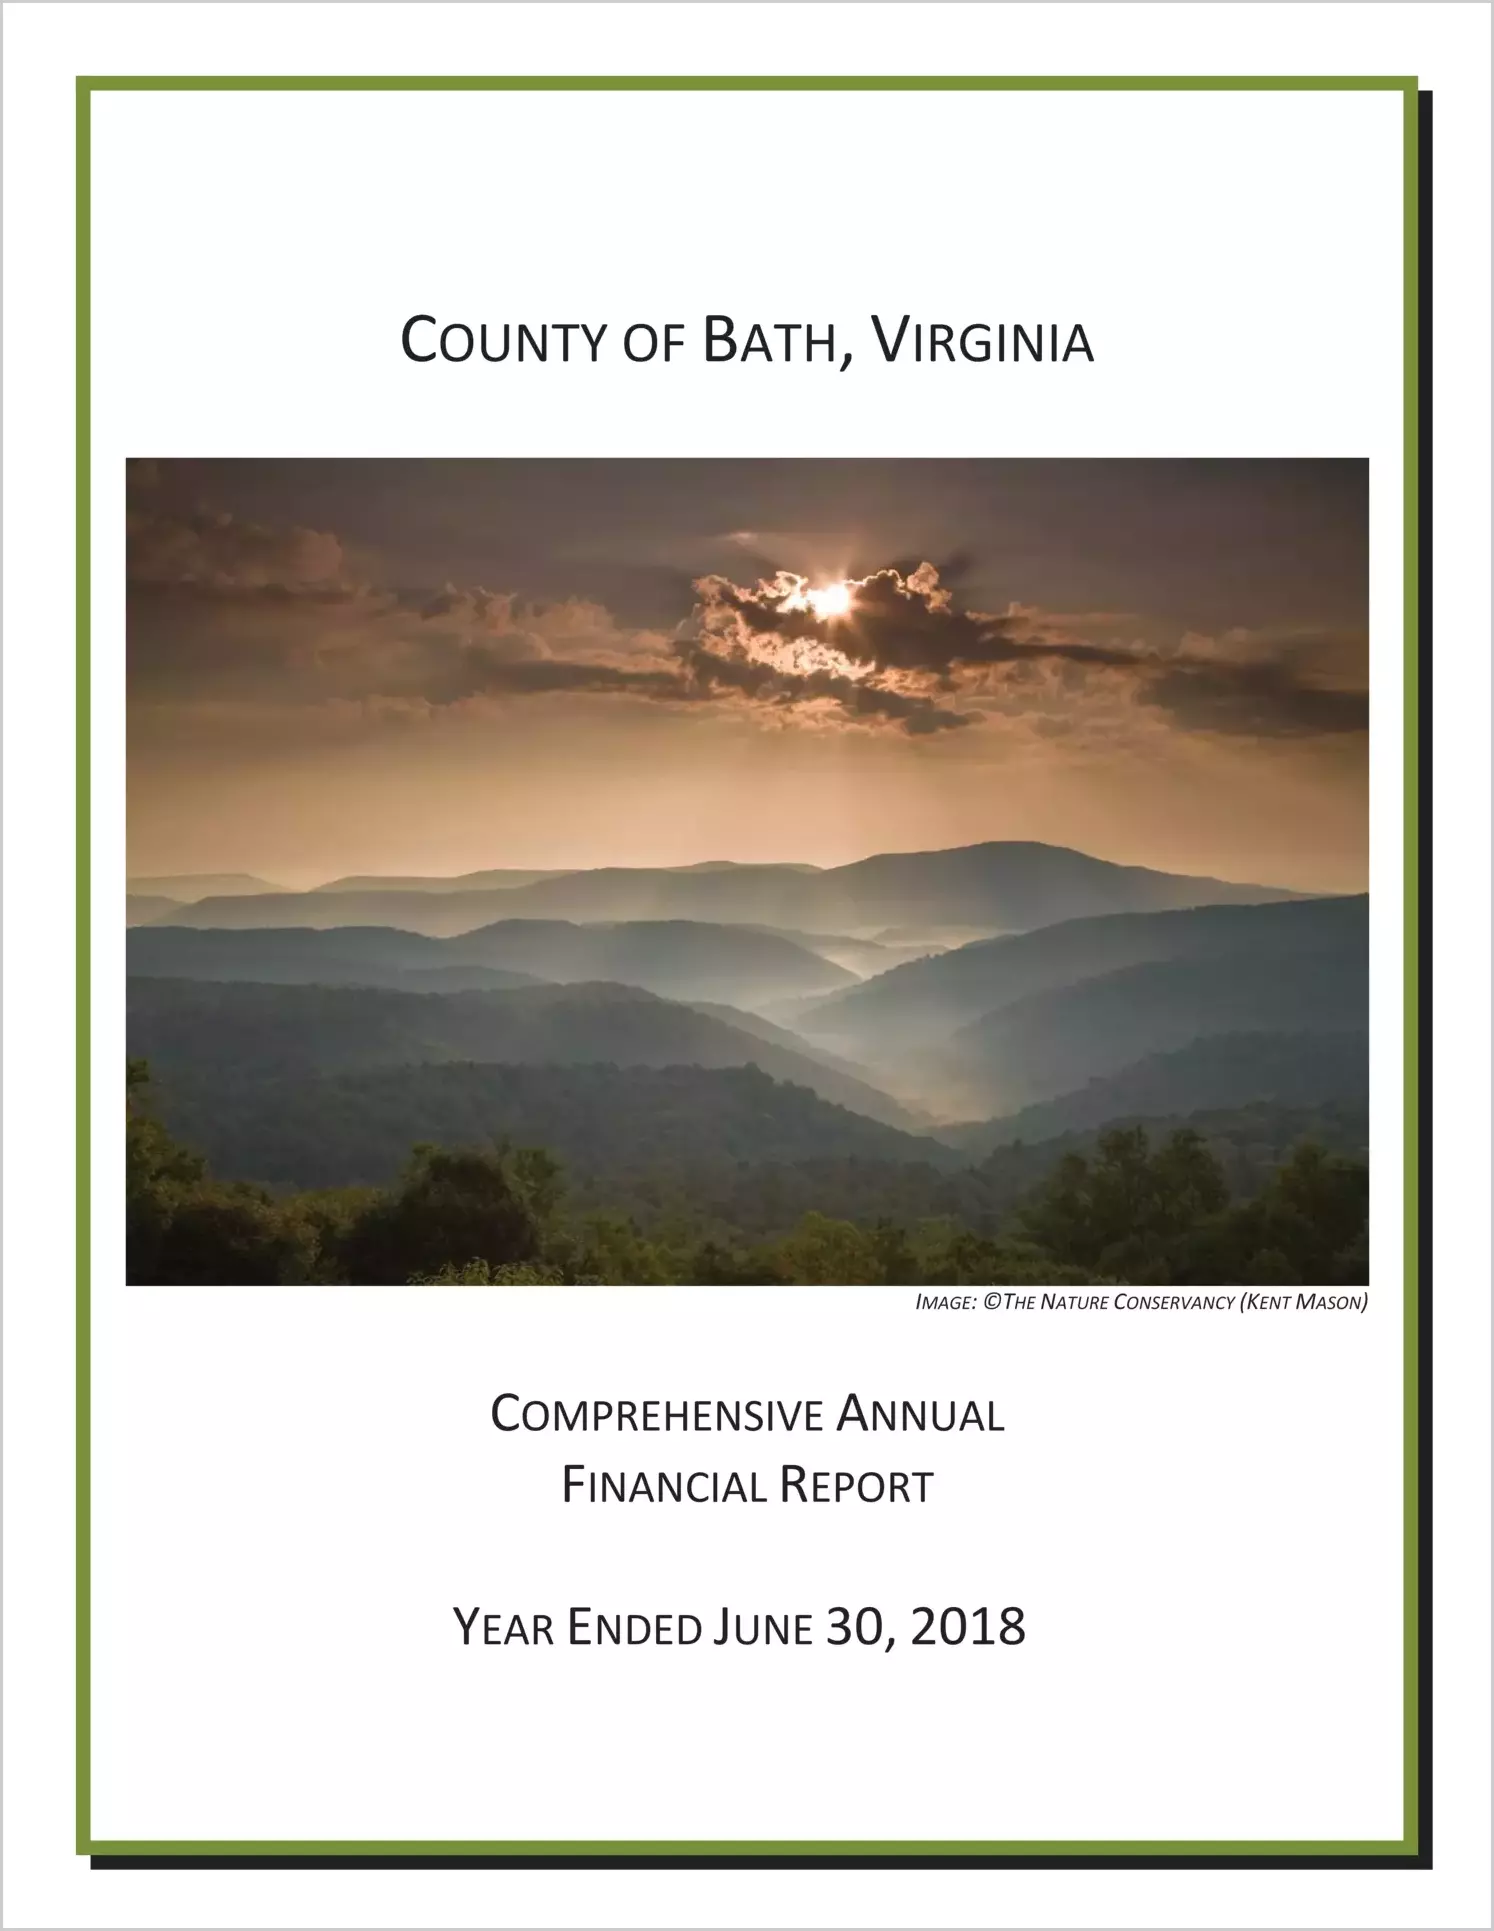 2018 Annual Financial Report for County of Bath